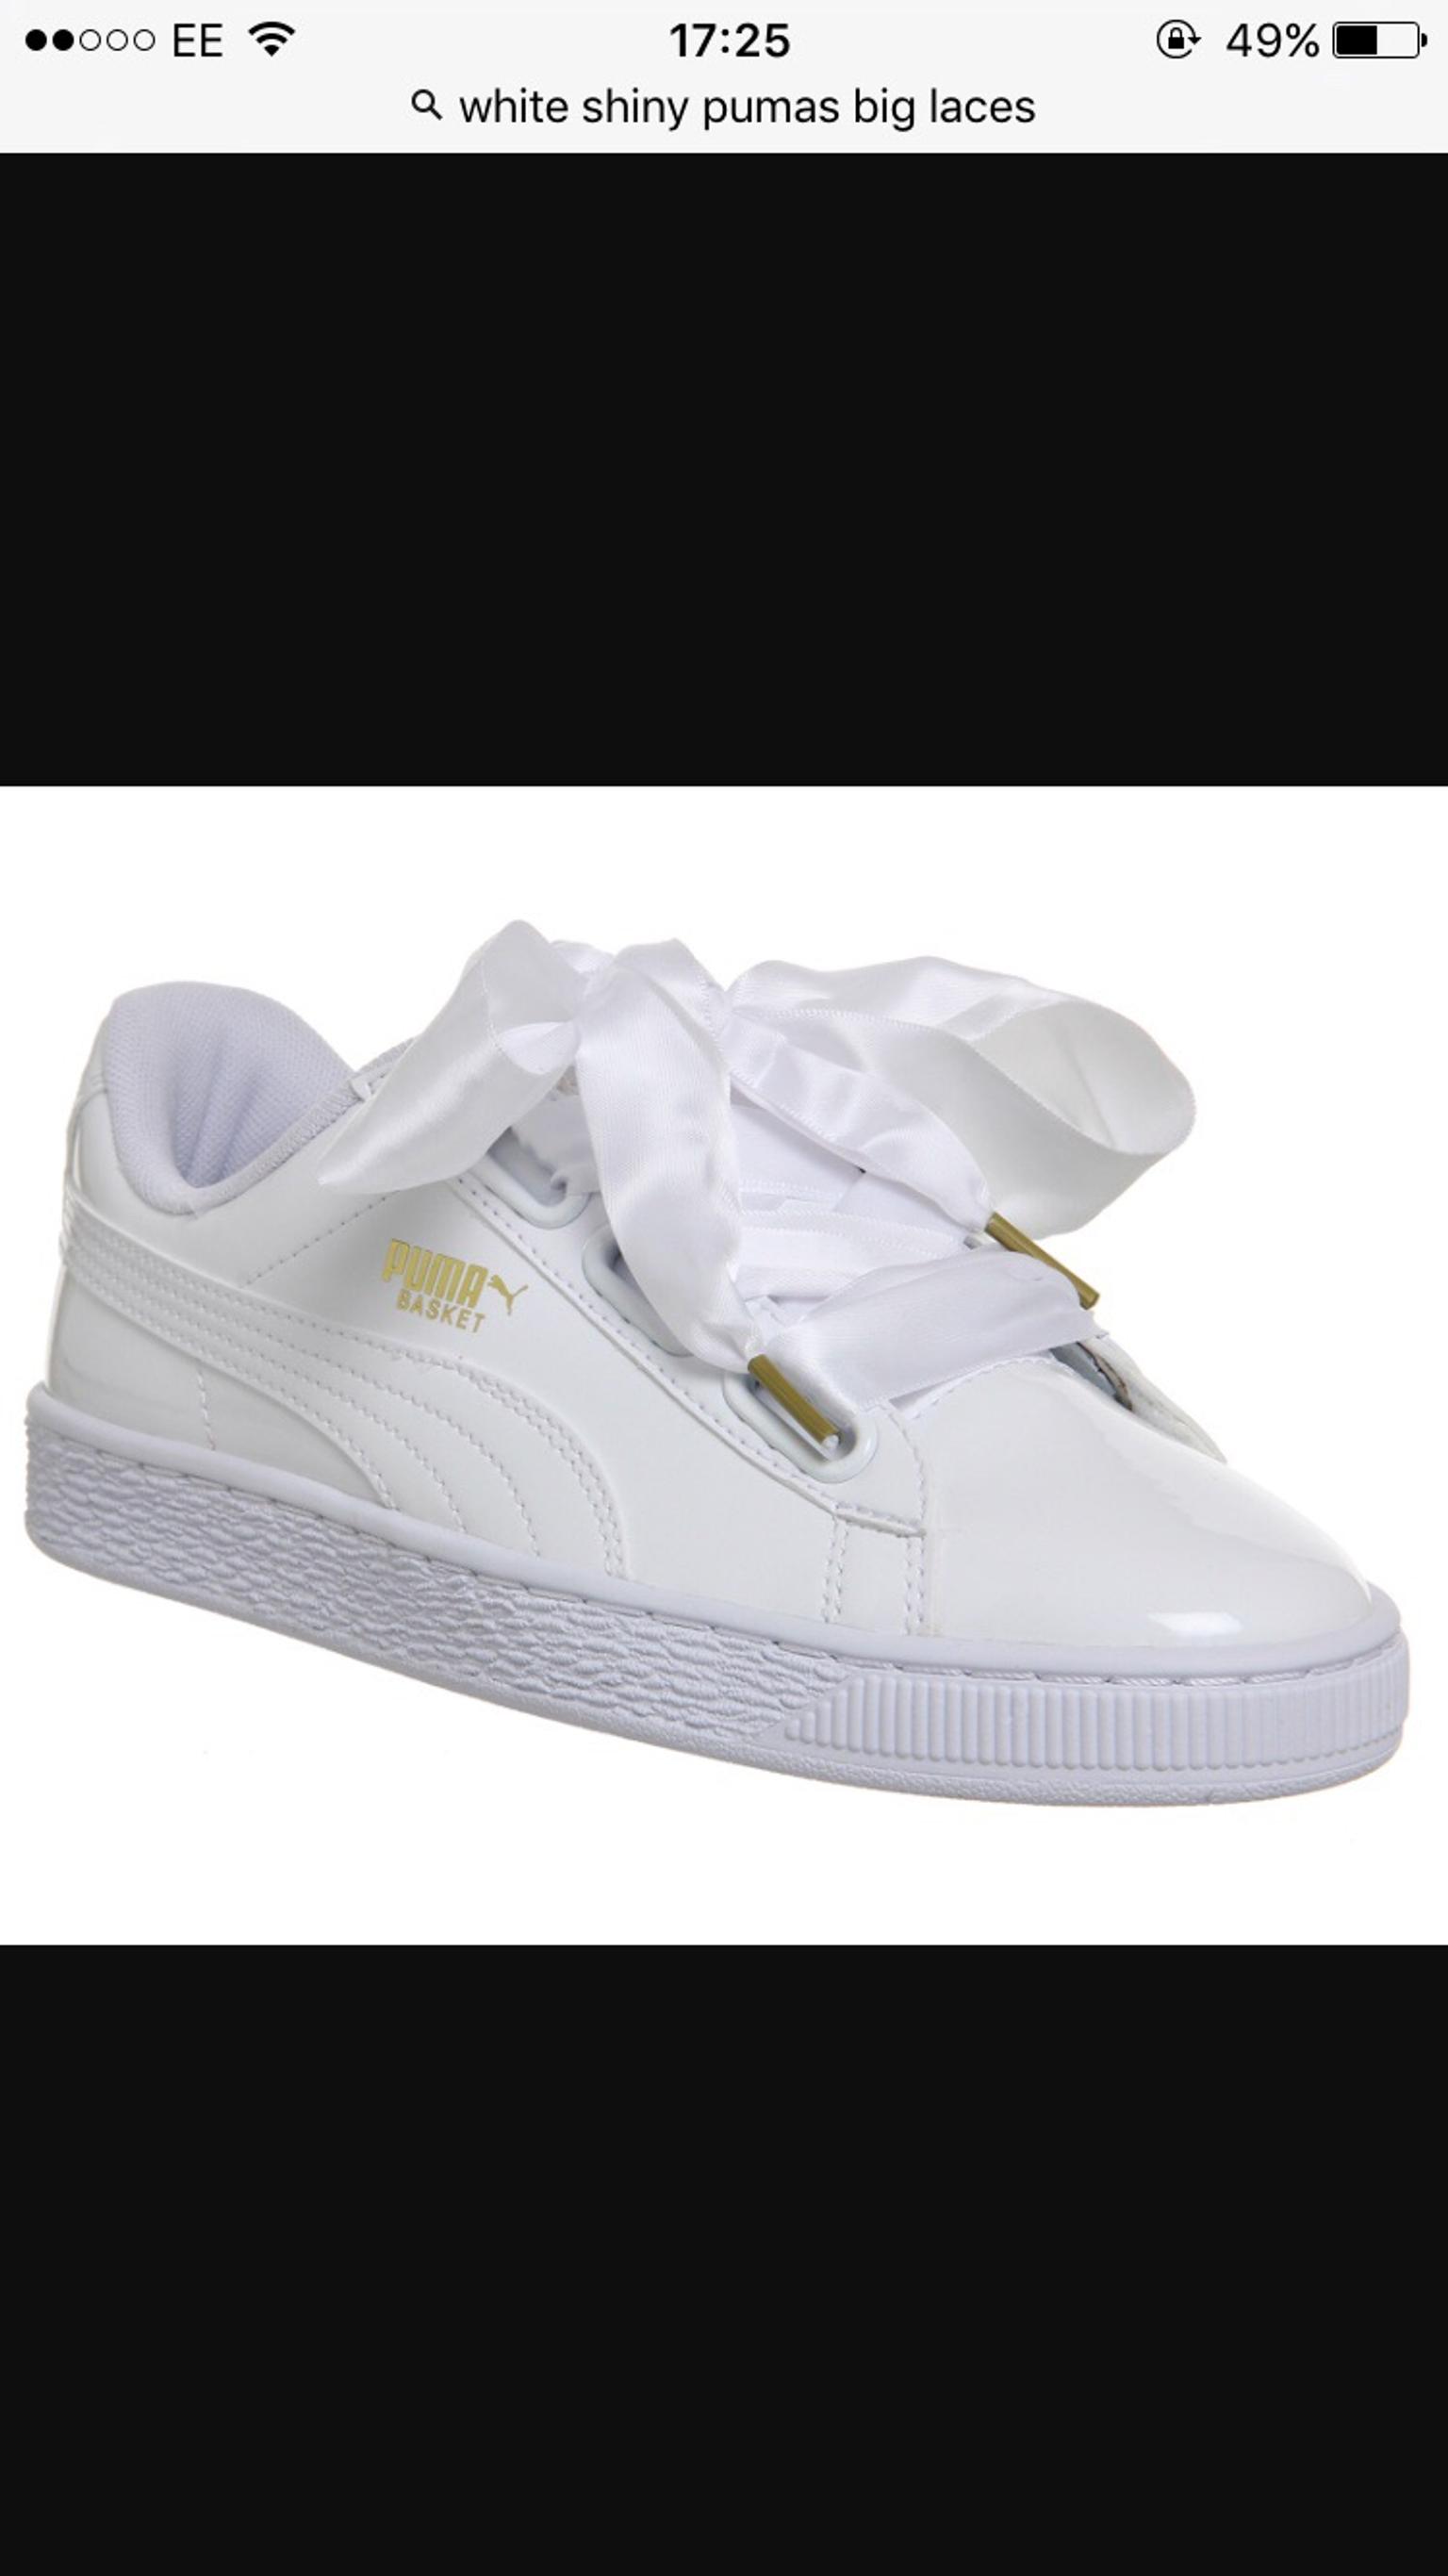 White shiny pumas in DY1 Dudley for £30 